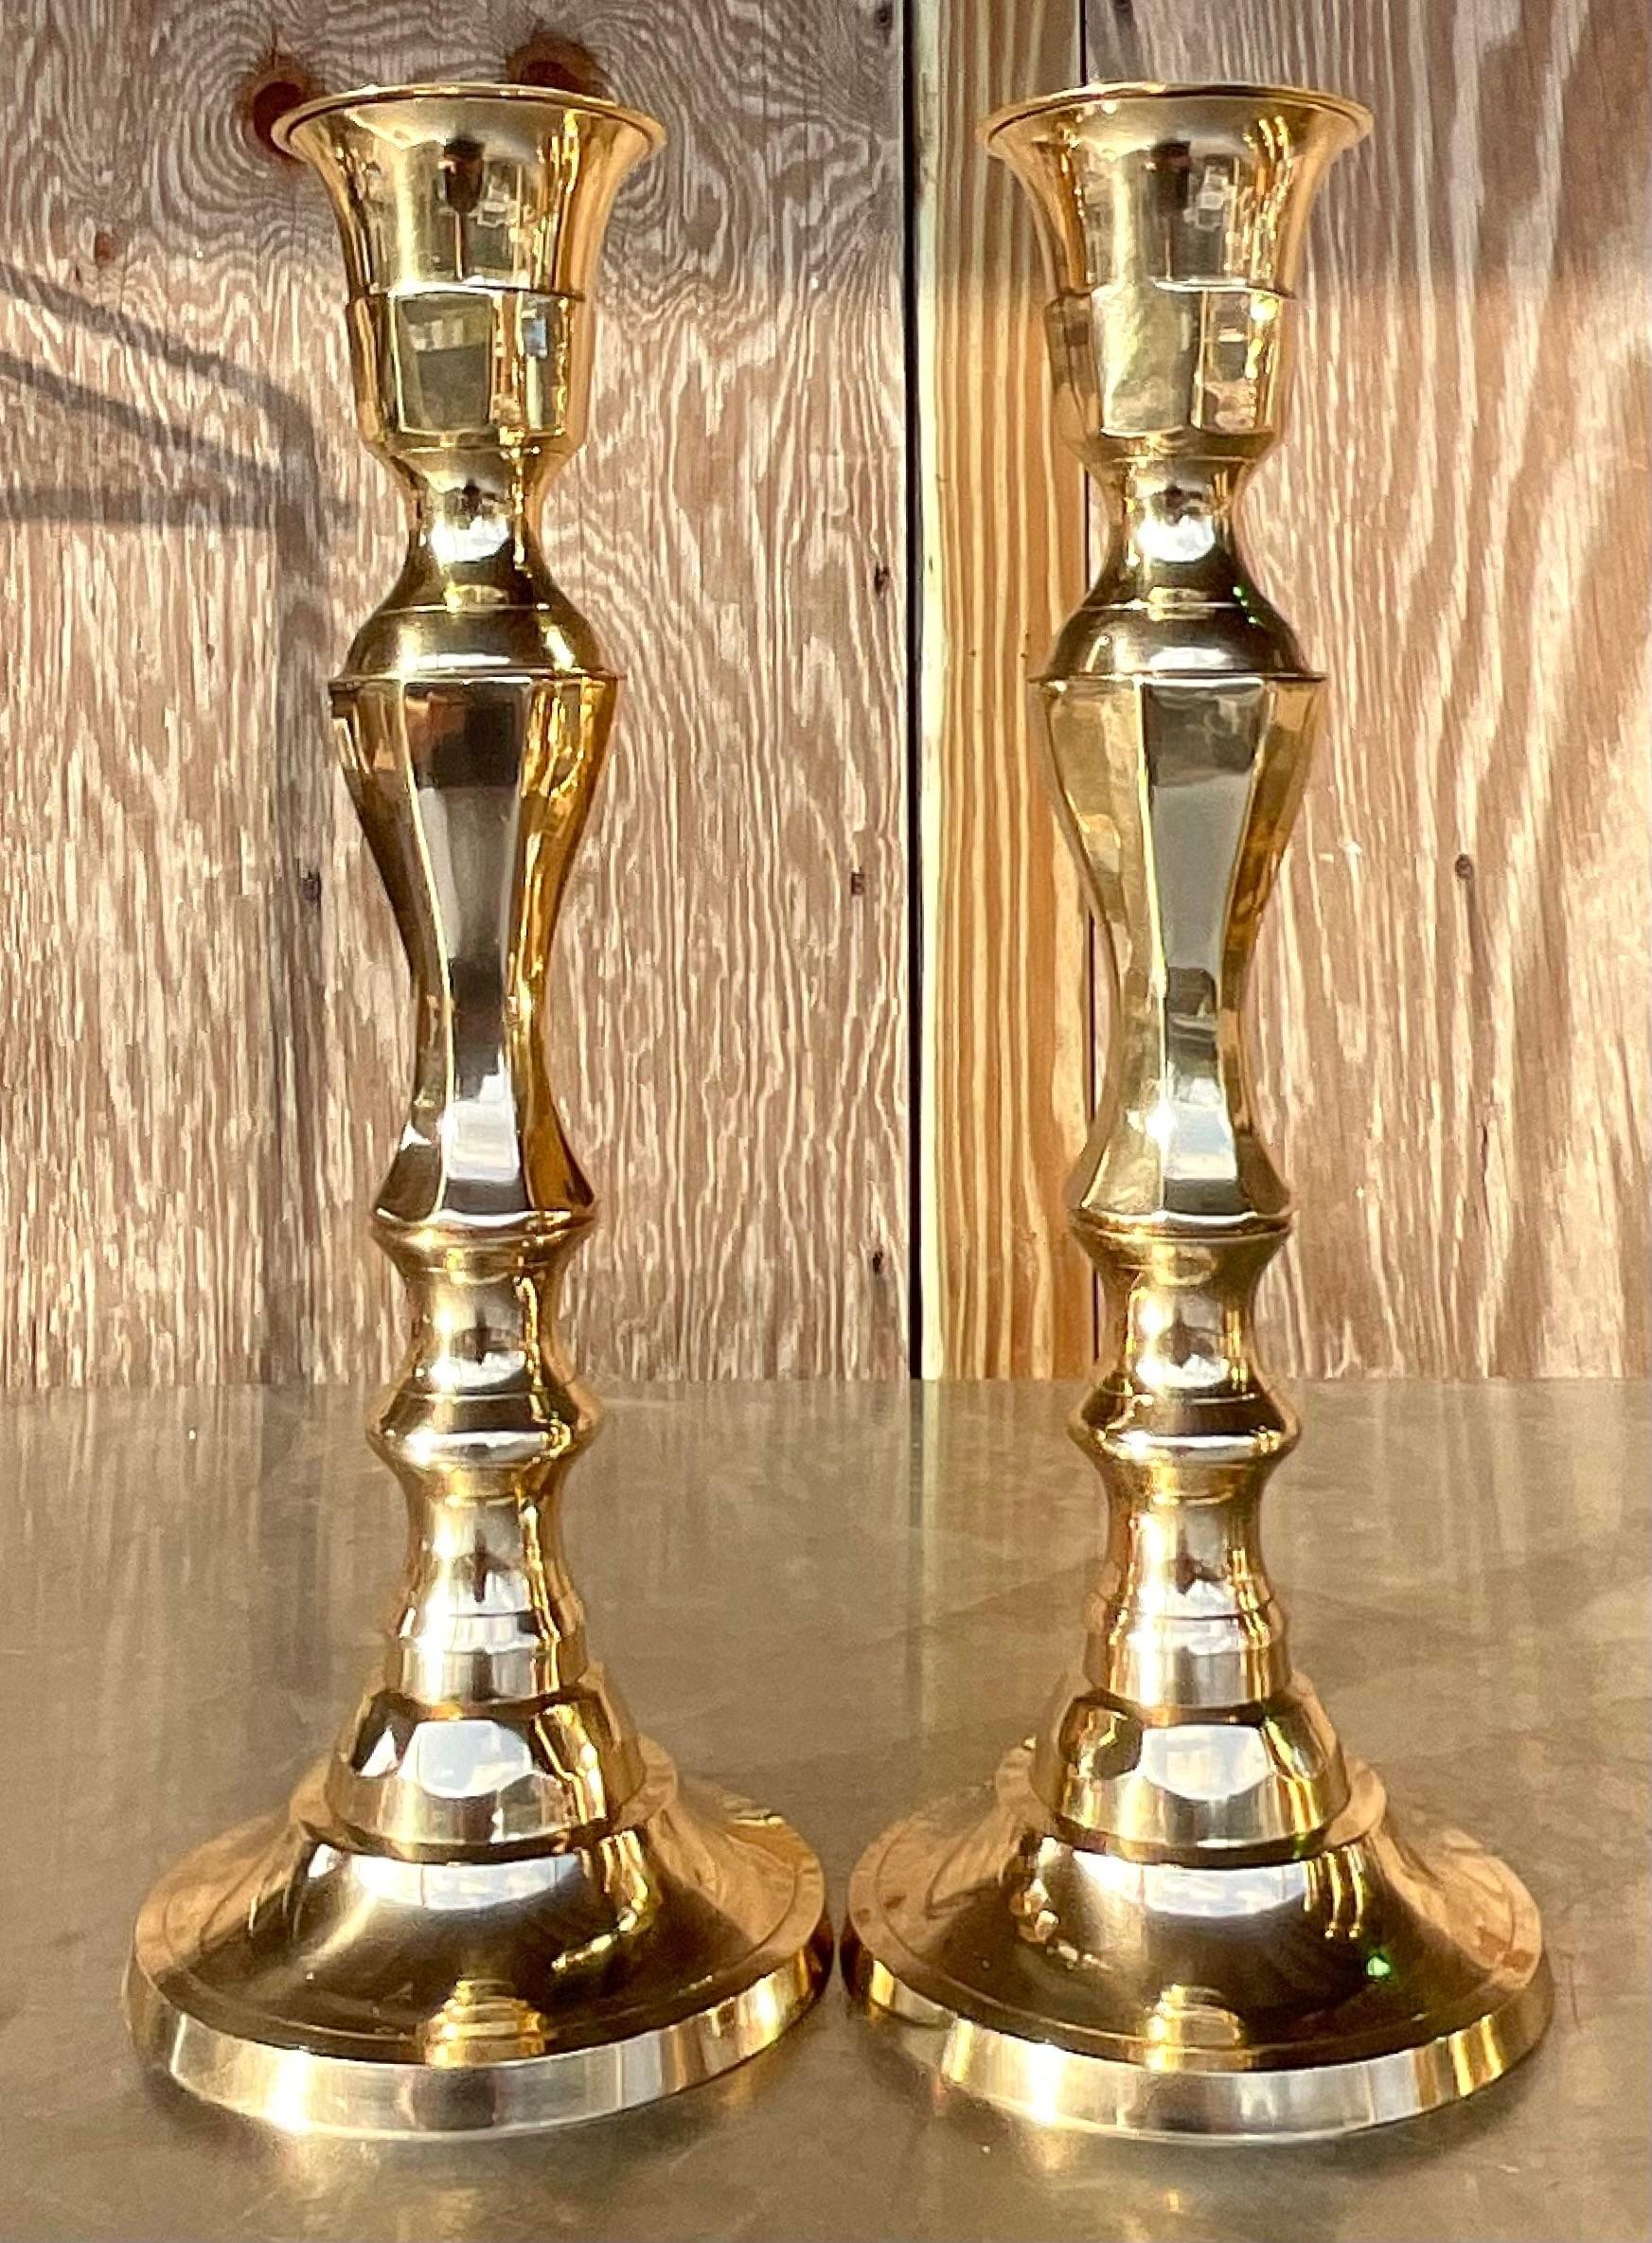 Vintage Regency Faceted Polished Brass Candlesticks - a Pair In Good Condition For Sale In west palm beach, FL